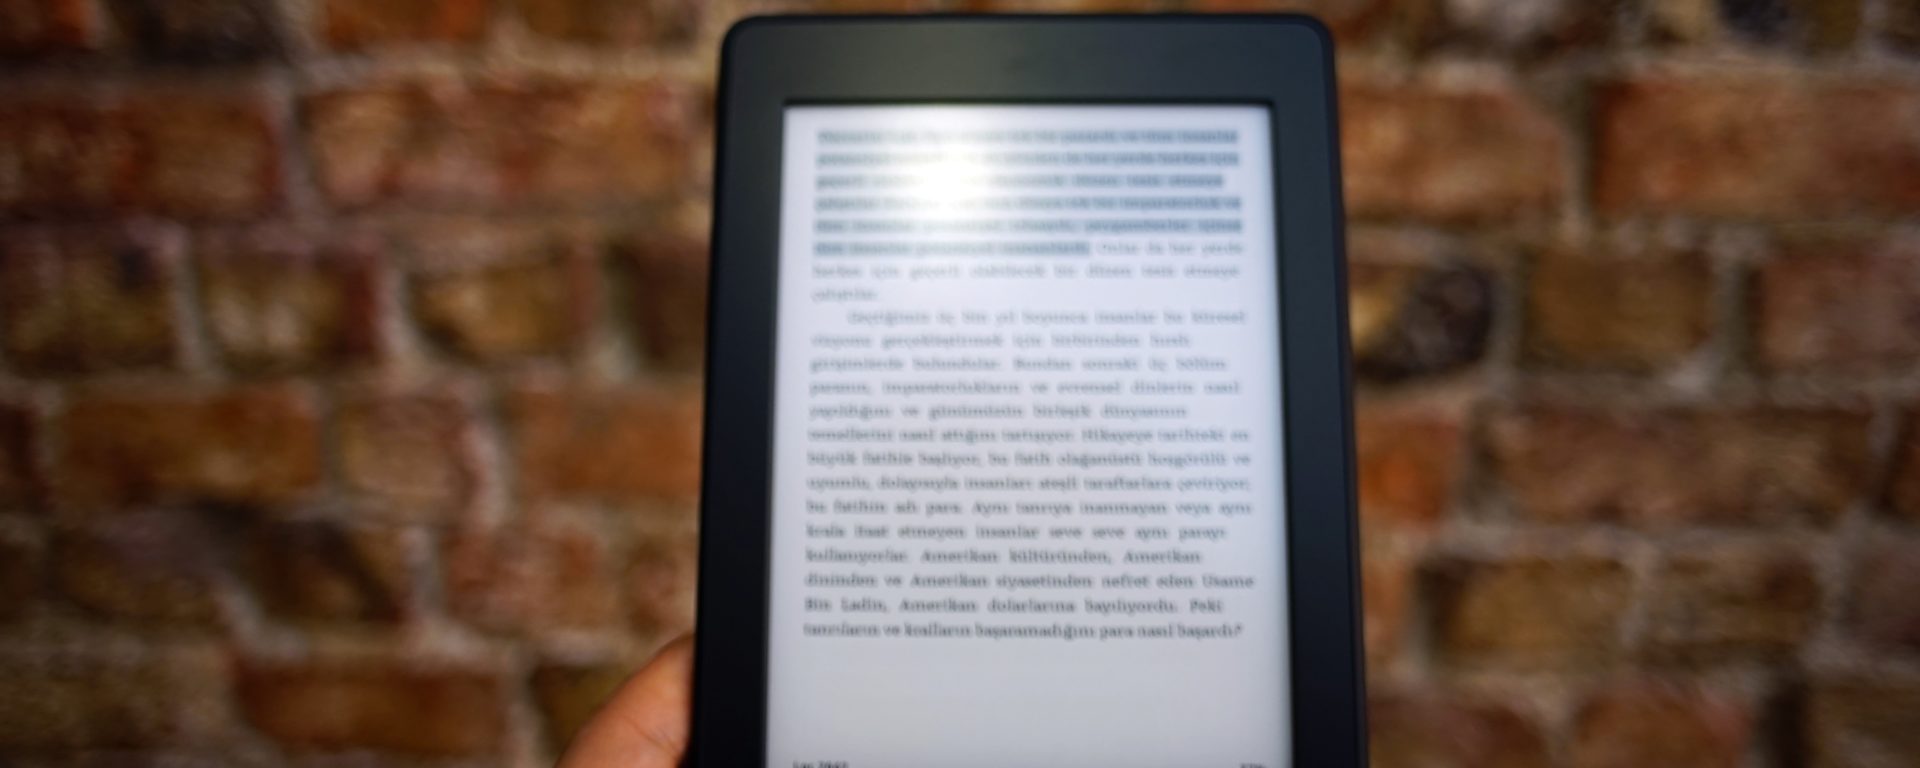 kindle for pc/mac to version 1.17